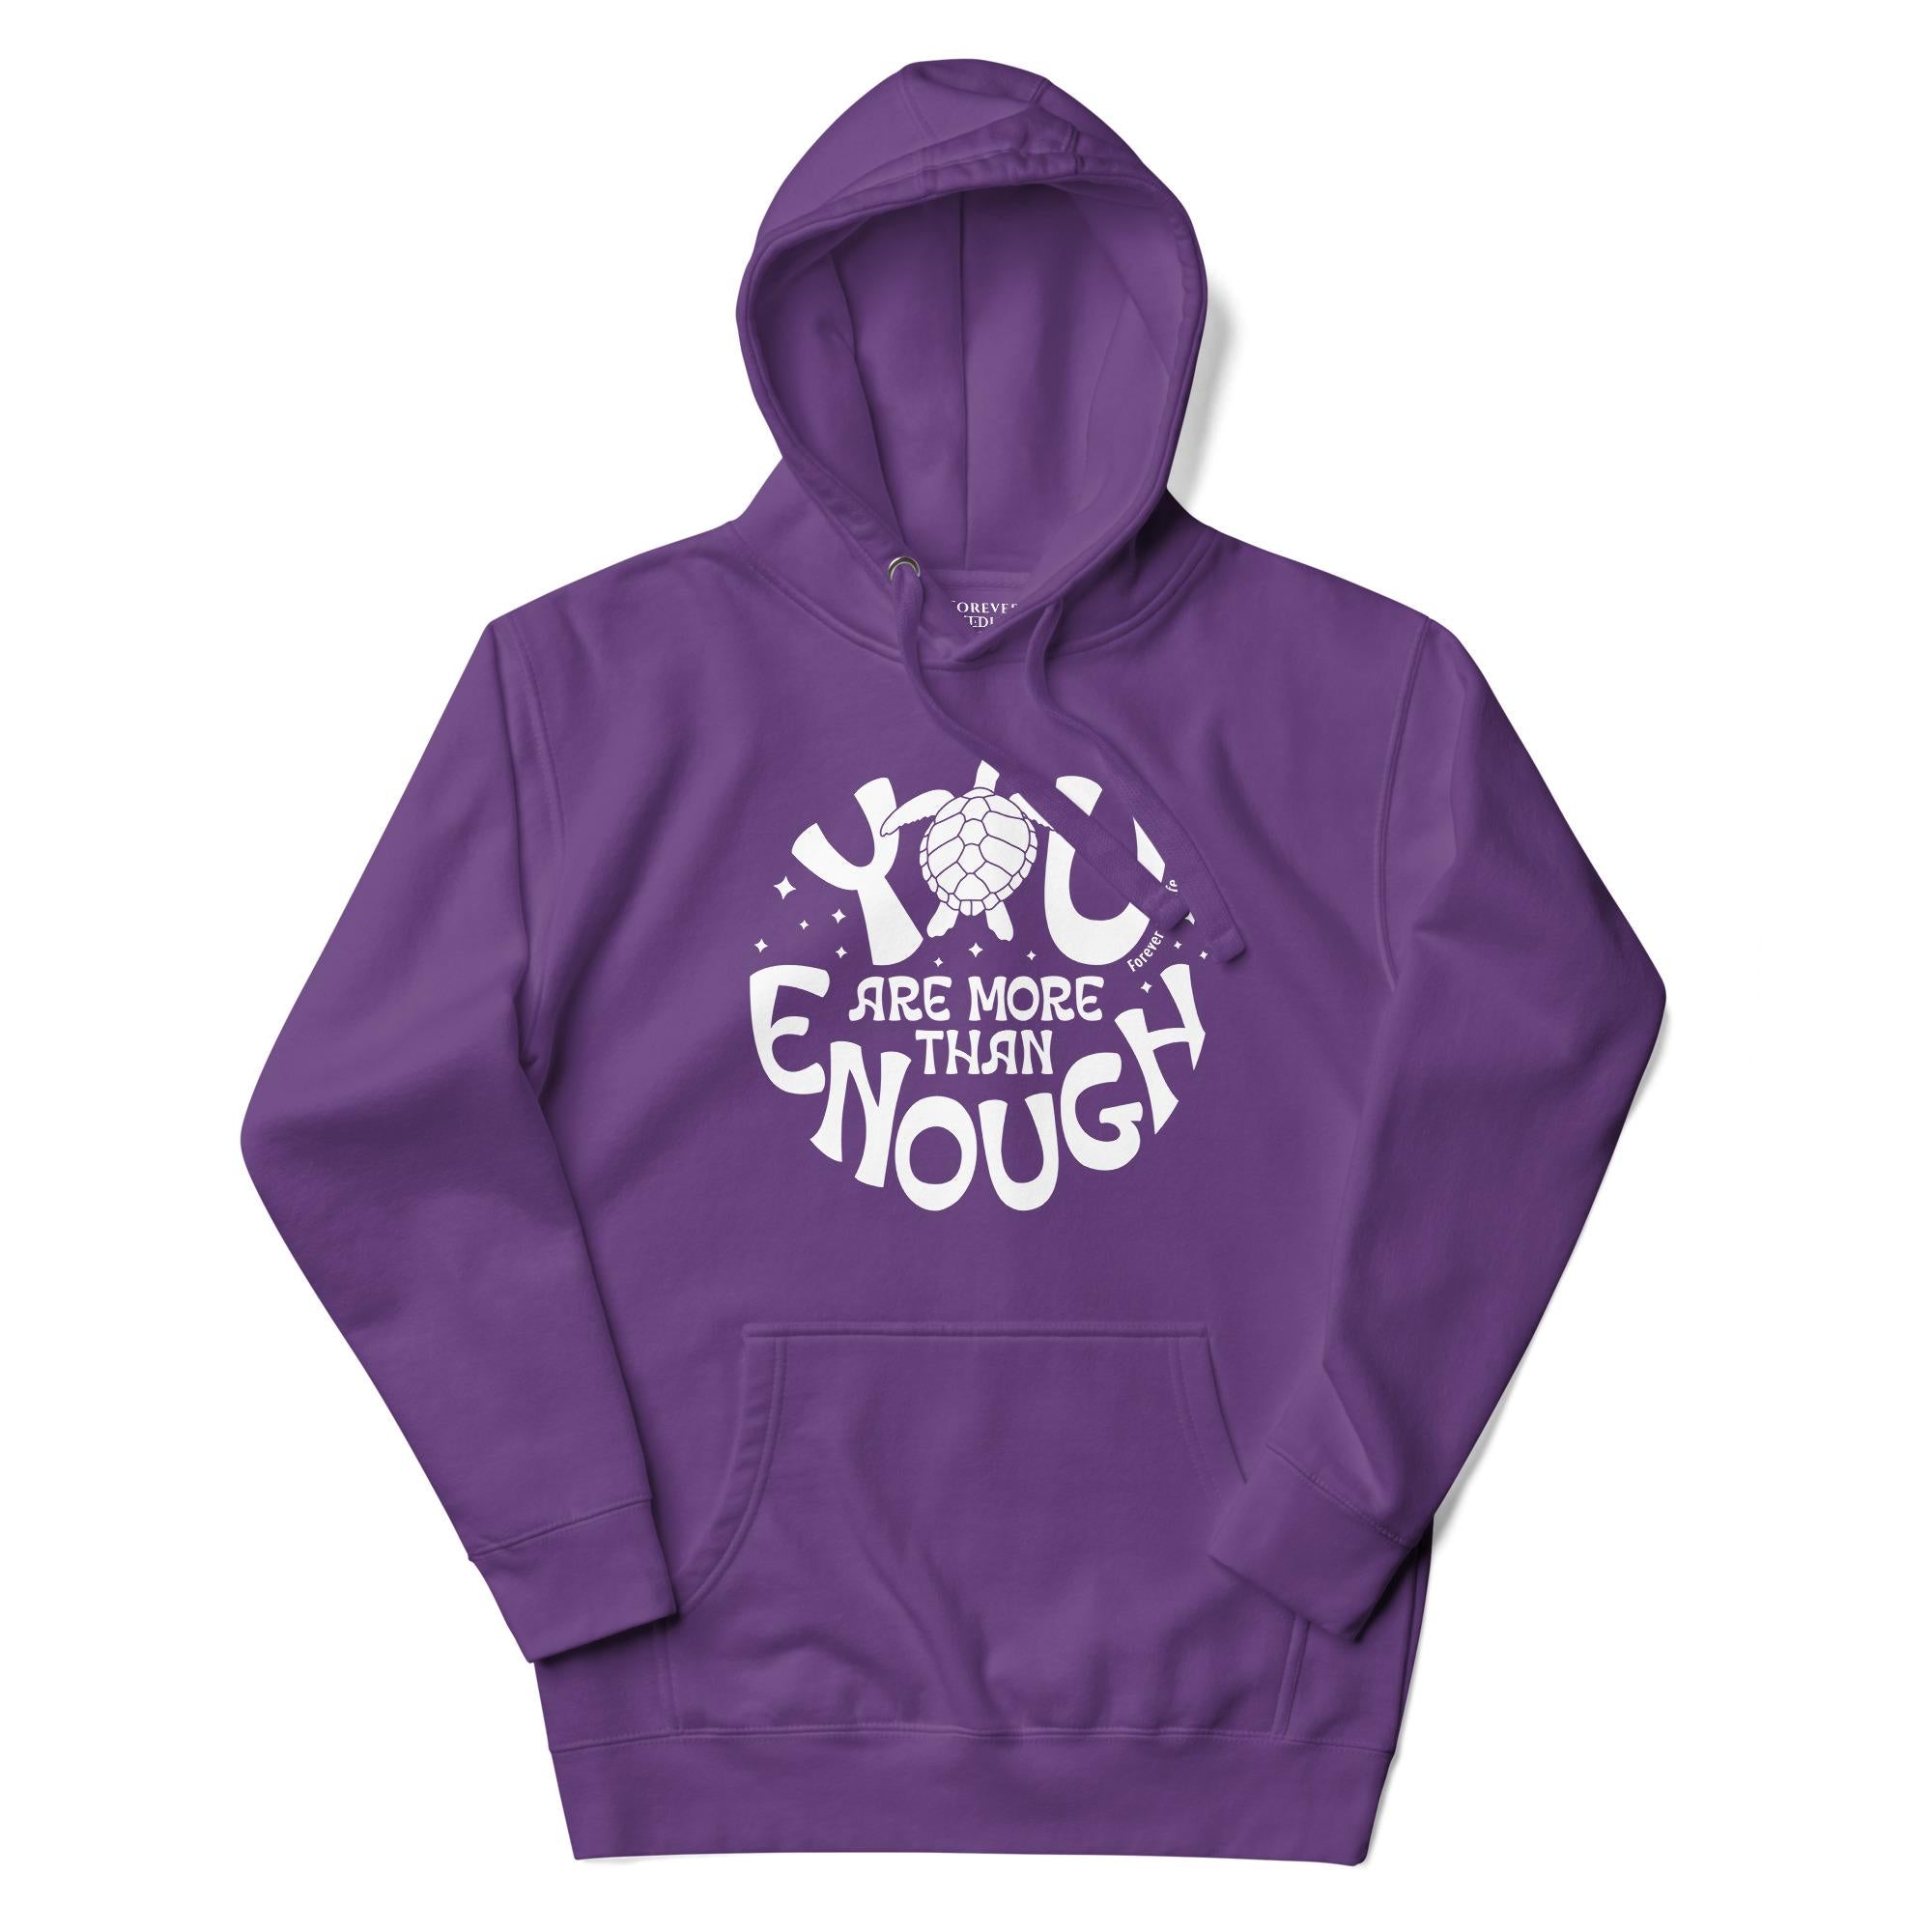 Sea Turtle Hoodie in Purple – Premium Wildlife Animal Inspirational Hoodie Design with YOu Are More Than Enough text, part of Wildlife Hoodies & Clothing from Forever Wildlife